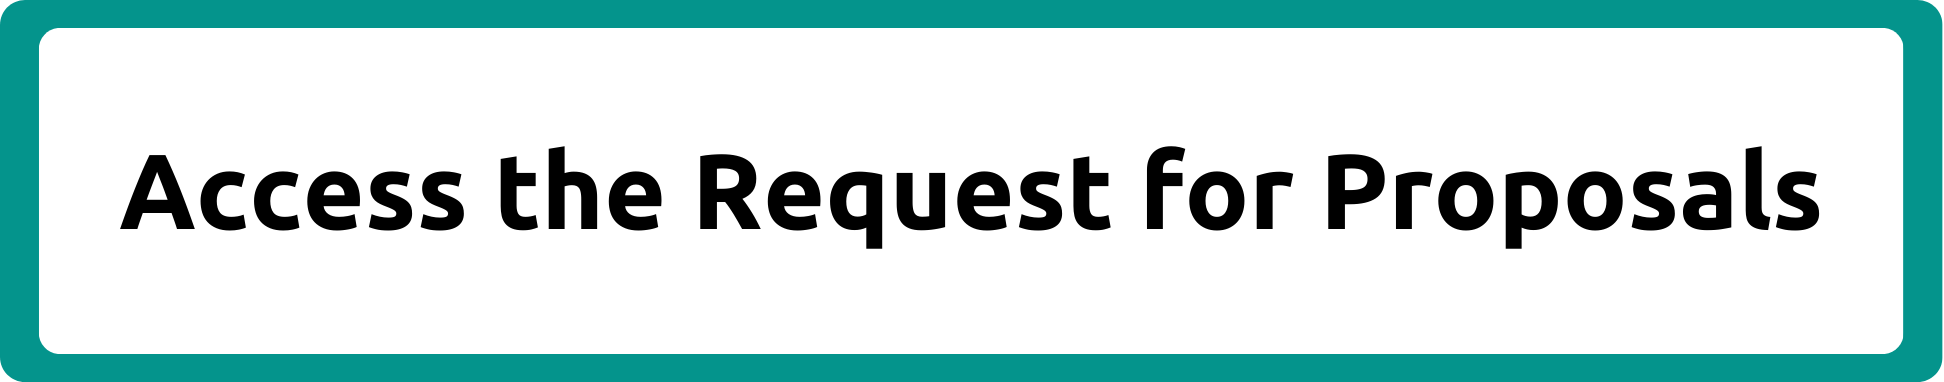 Access the Request for Proposals